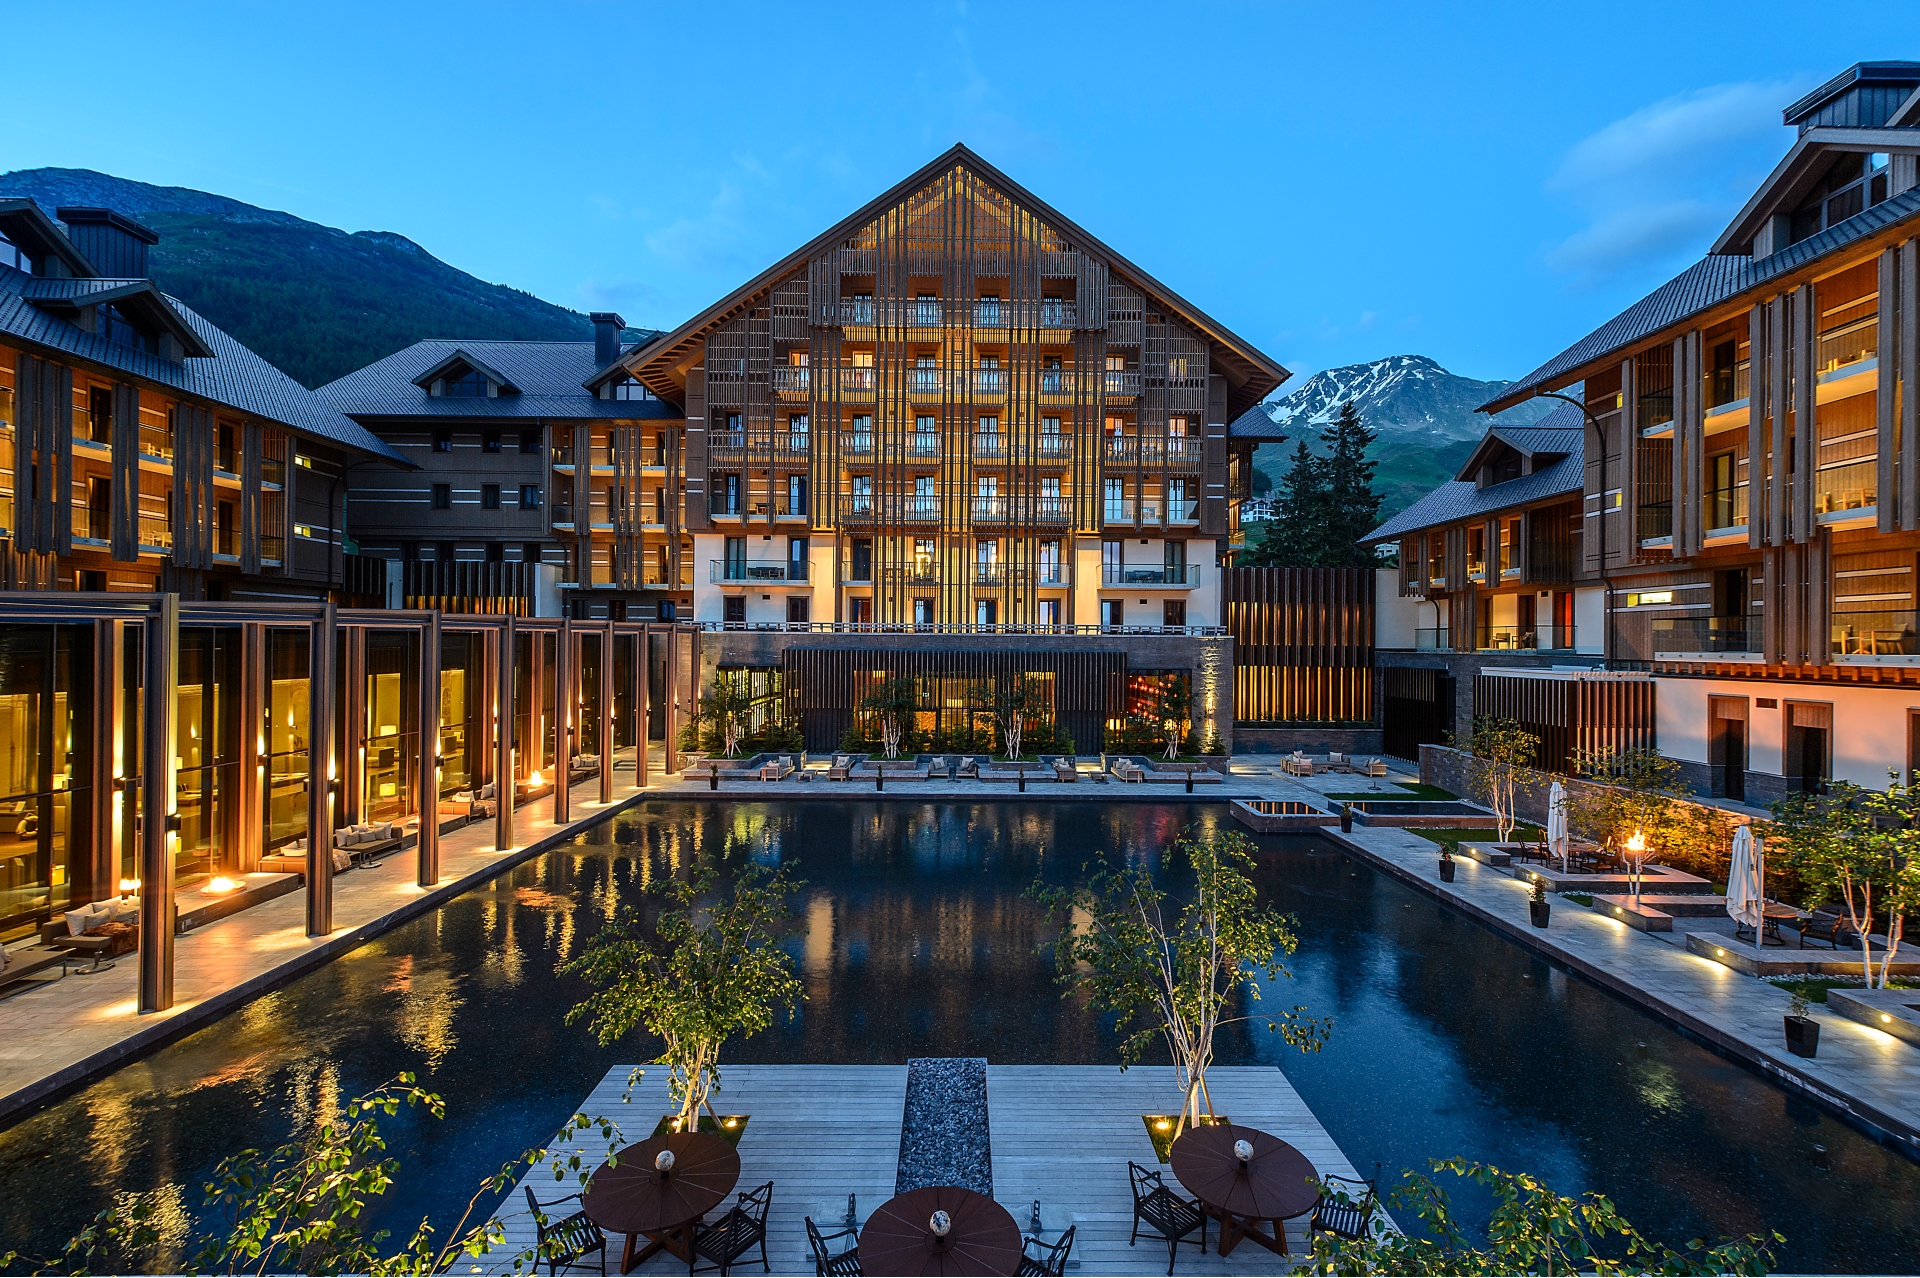 A view of The Chedi Andermatt exterior building with pool and night lights in summer.